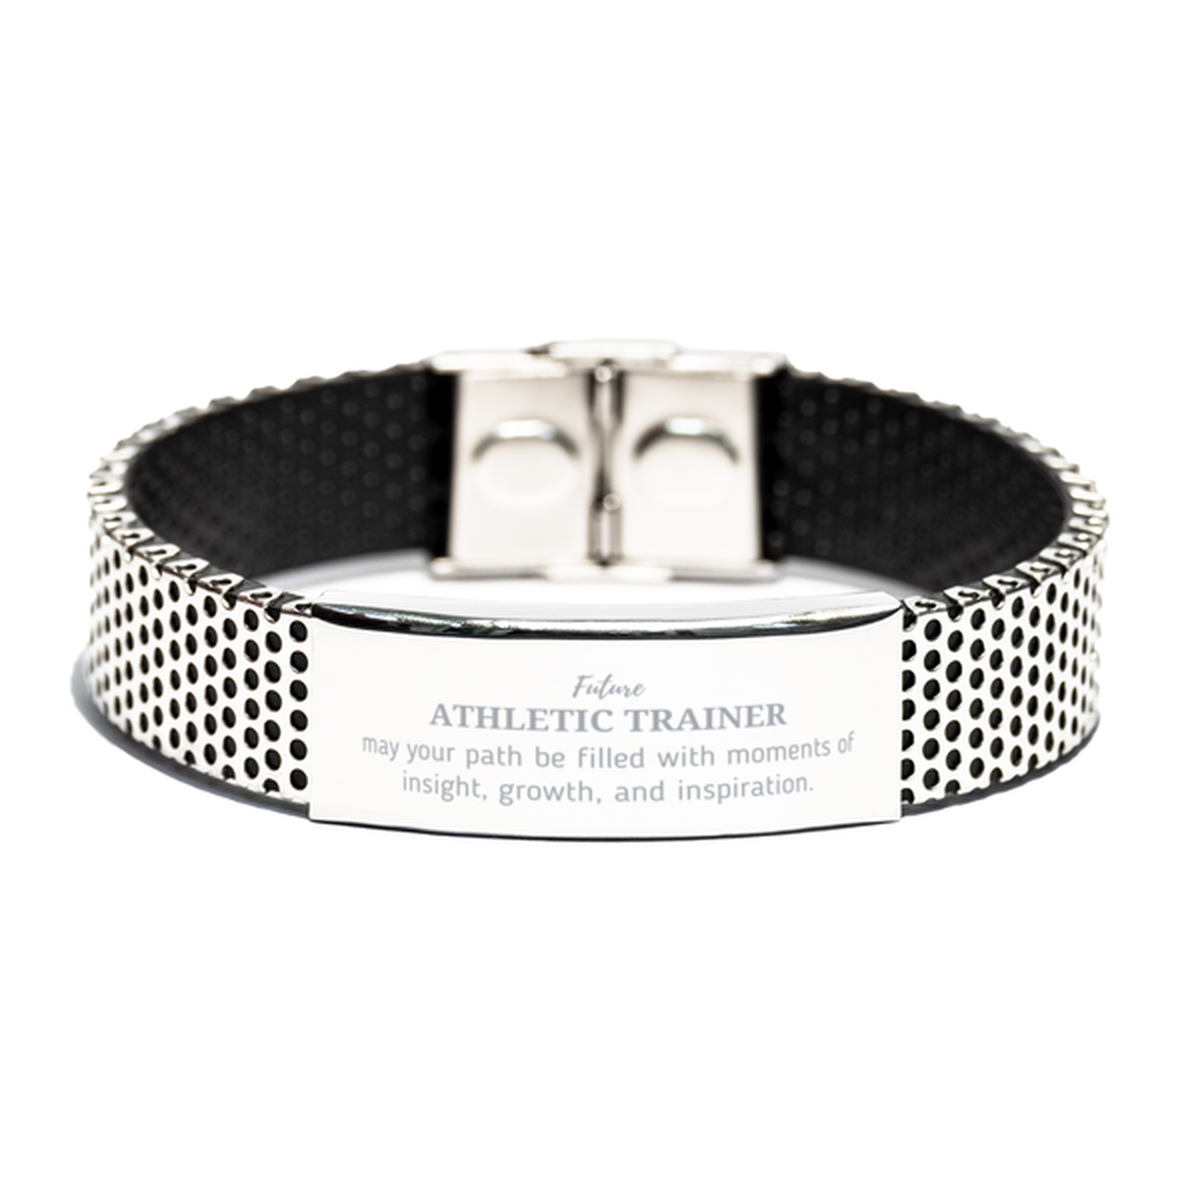 Future Athletic Trainer Gifts, May your path be filled with moments of insight, Graduation Gifts for New Athletic Trainer, Christmas Unique Stainless Steel Bracelet For Men, Women, Friends